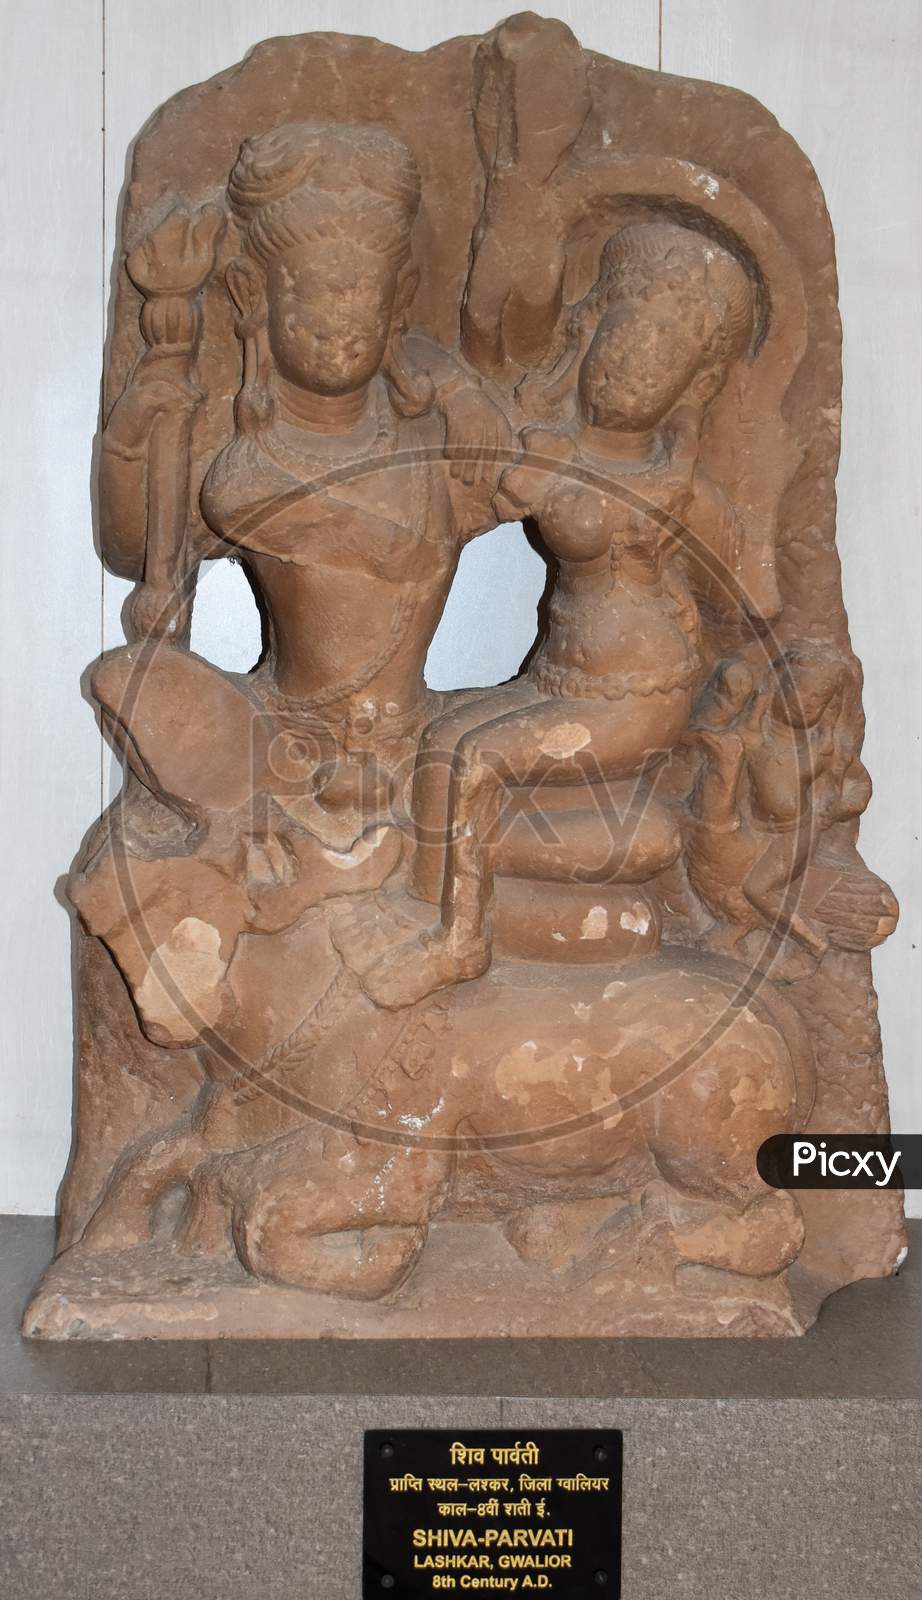 Gwalior, Madhya Pradesh/India - March 15, 2020 : Sculpture Of Shiva-Parvati Built In 8Th Century A.D.